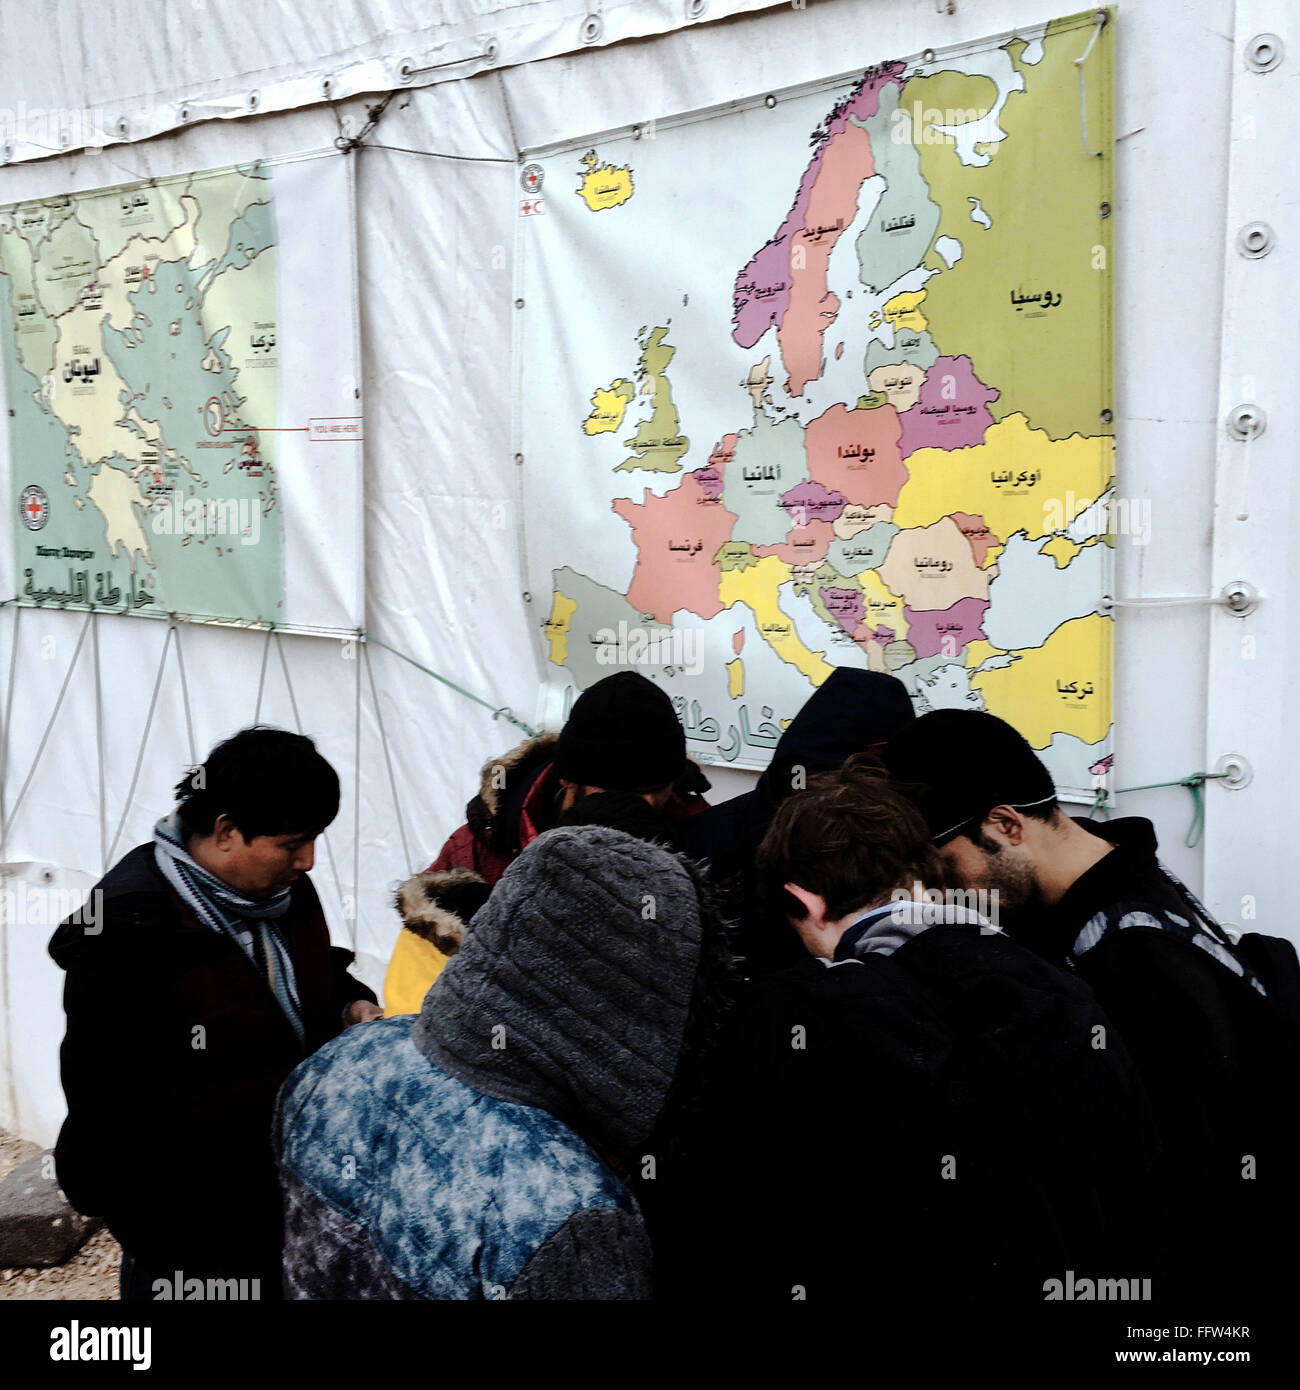 Migrants on Chios Island -  03/01/2016  -  Greece / Cyclades (the) / Chios island  -  Refugees gathered in front of the UNHCR te Stock Photo